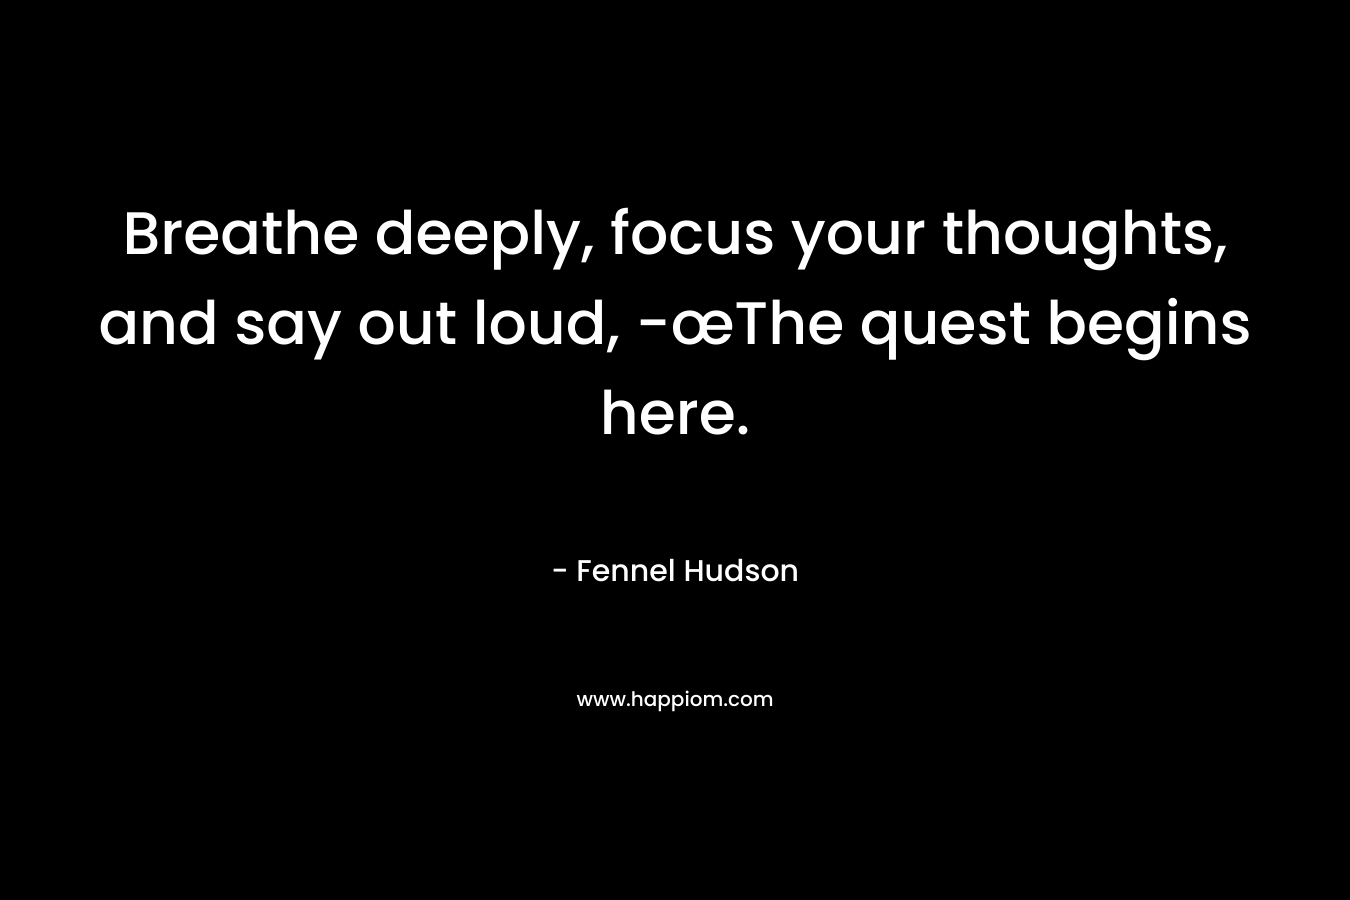 Breathe deeply, focus your thoughts, and say out loud, -œThe quest begins here.